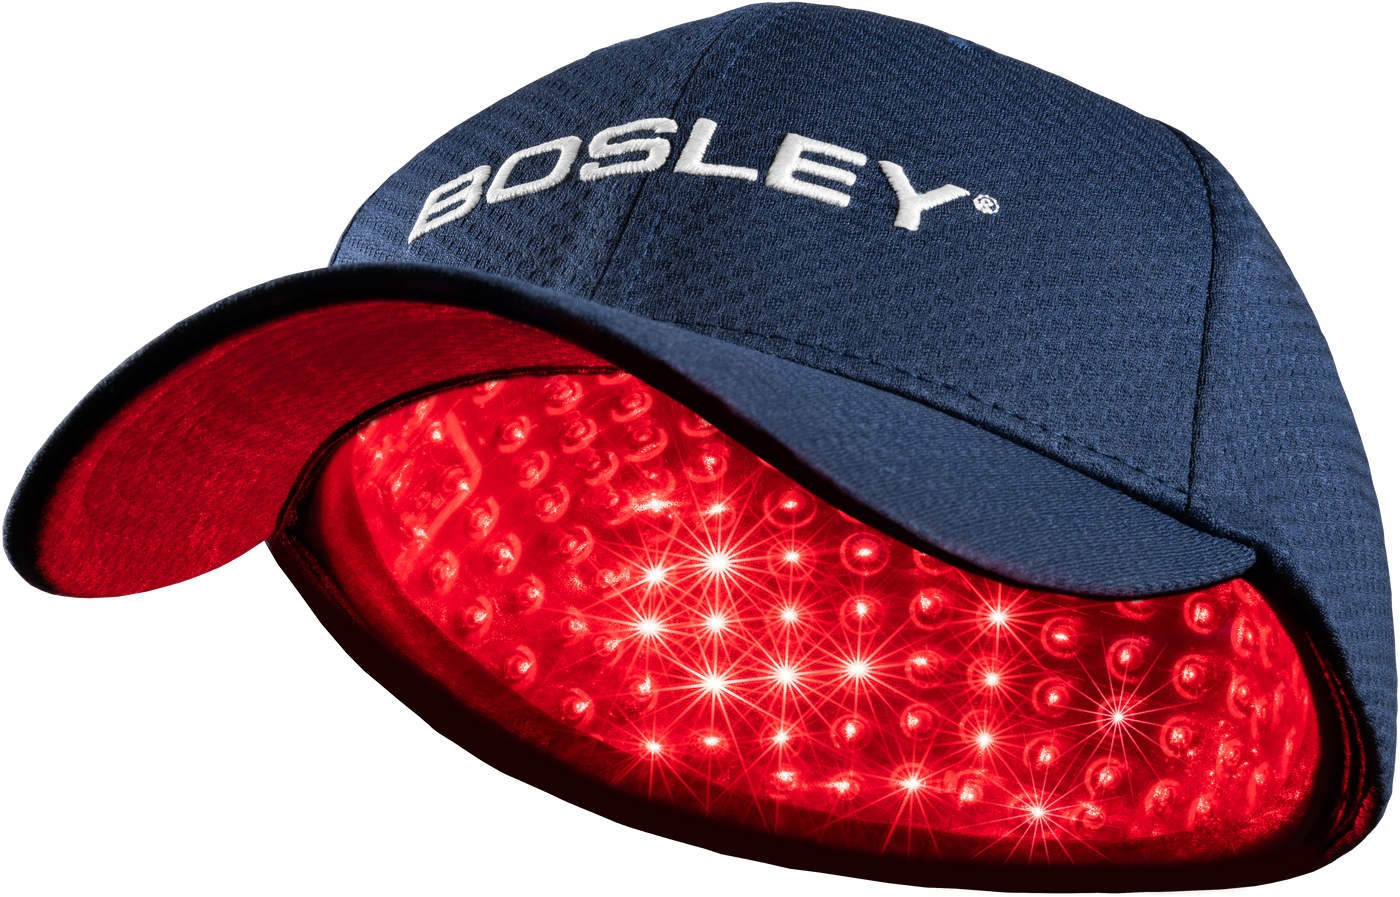 Bosley Revitalizer Hat Up Close Powered On